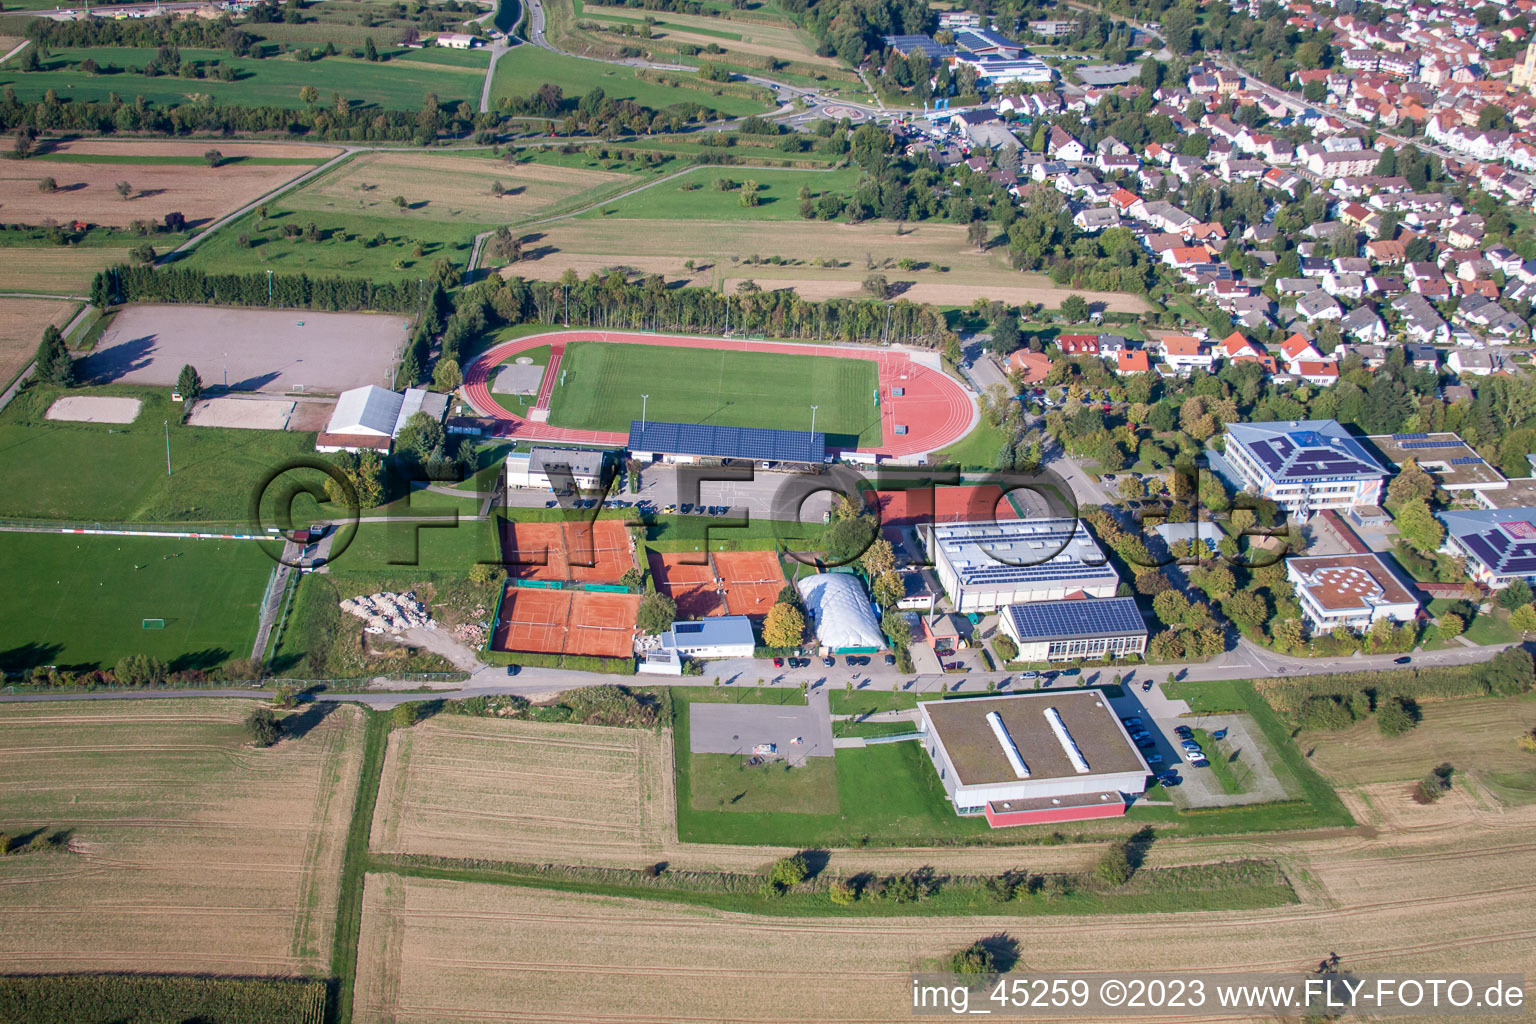 Sports grounds of SV-1899 eV Langensteinbach in the district Langensteinbach in Karlsbad in the state Baden-Wuerttemberg, Germany from above